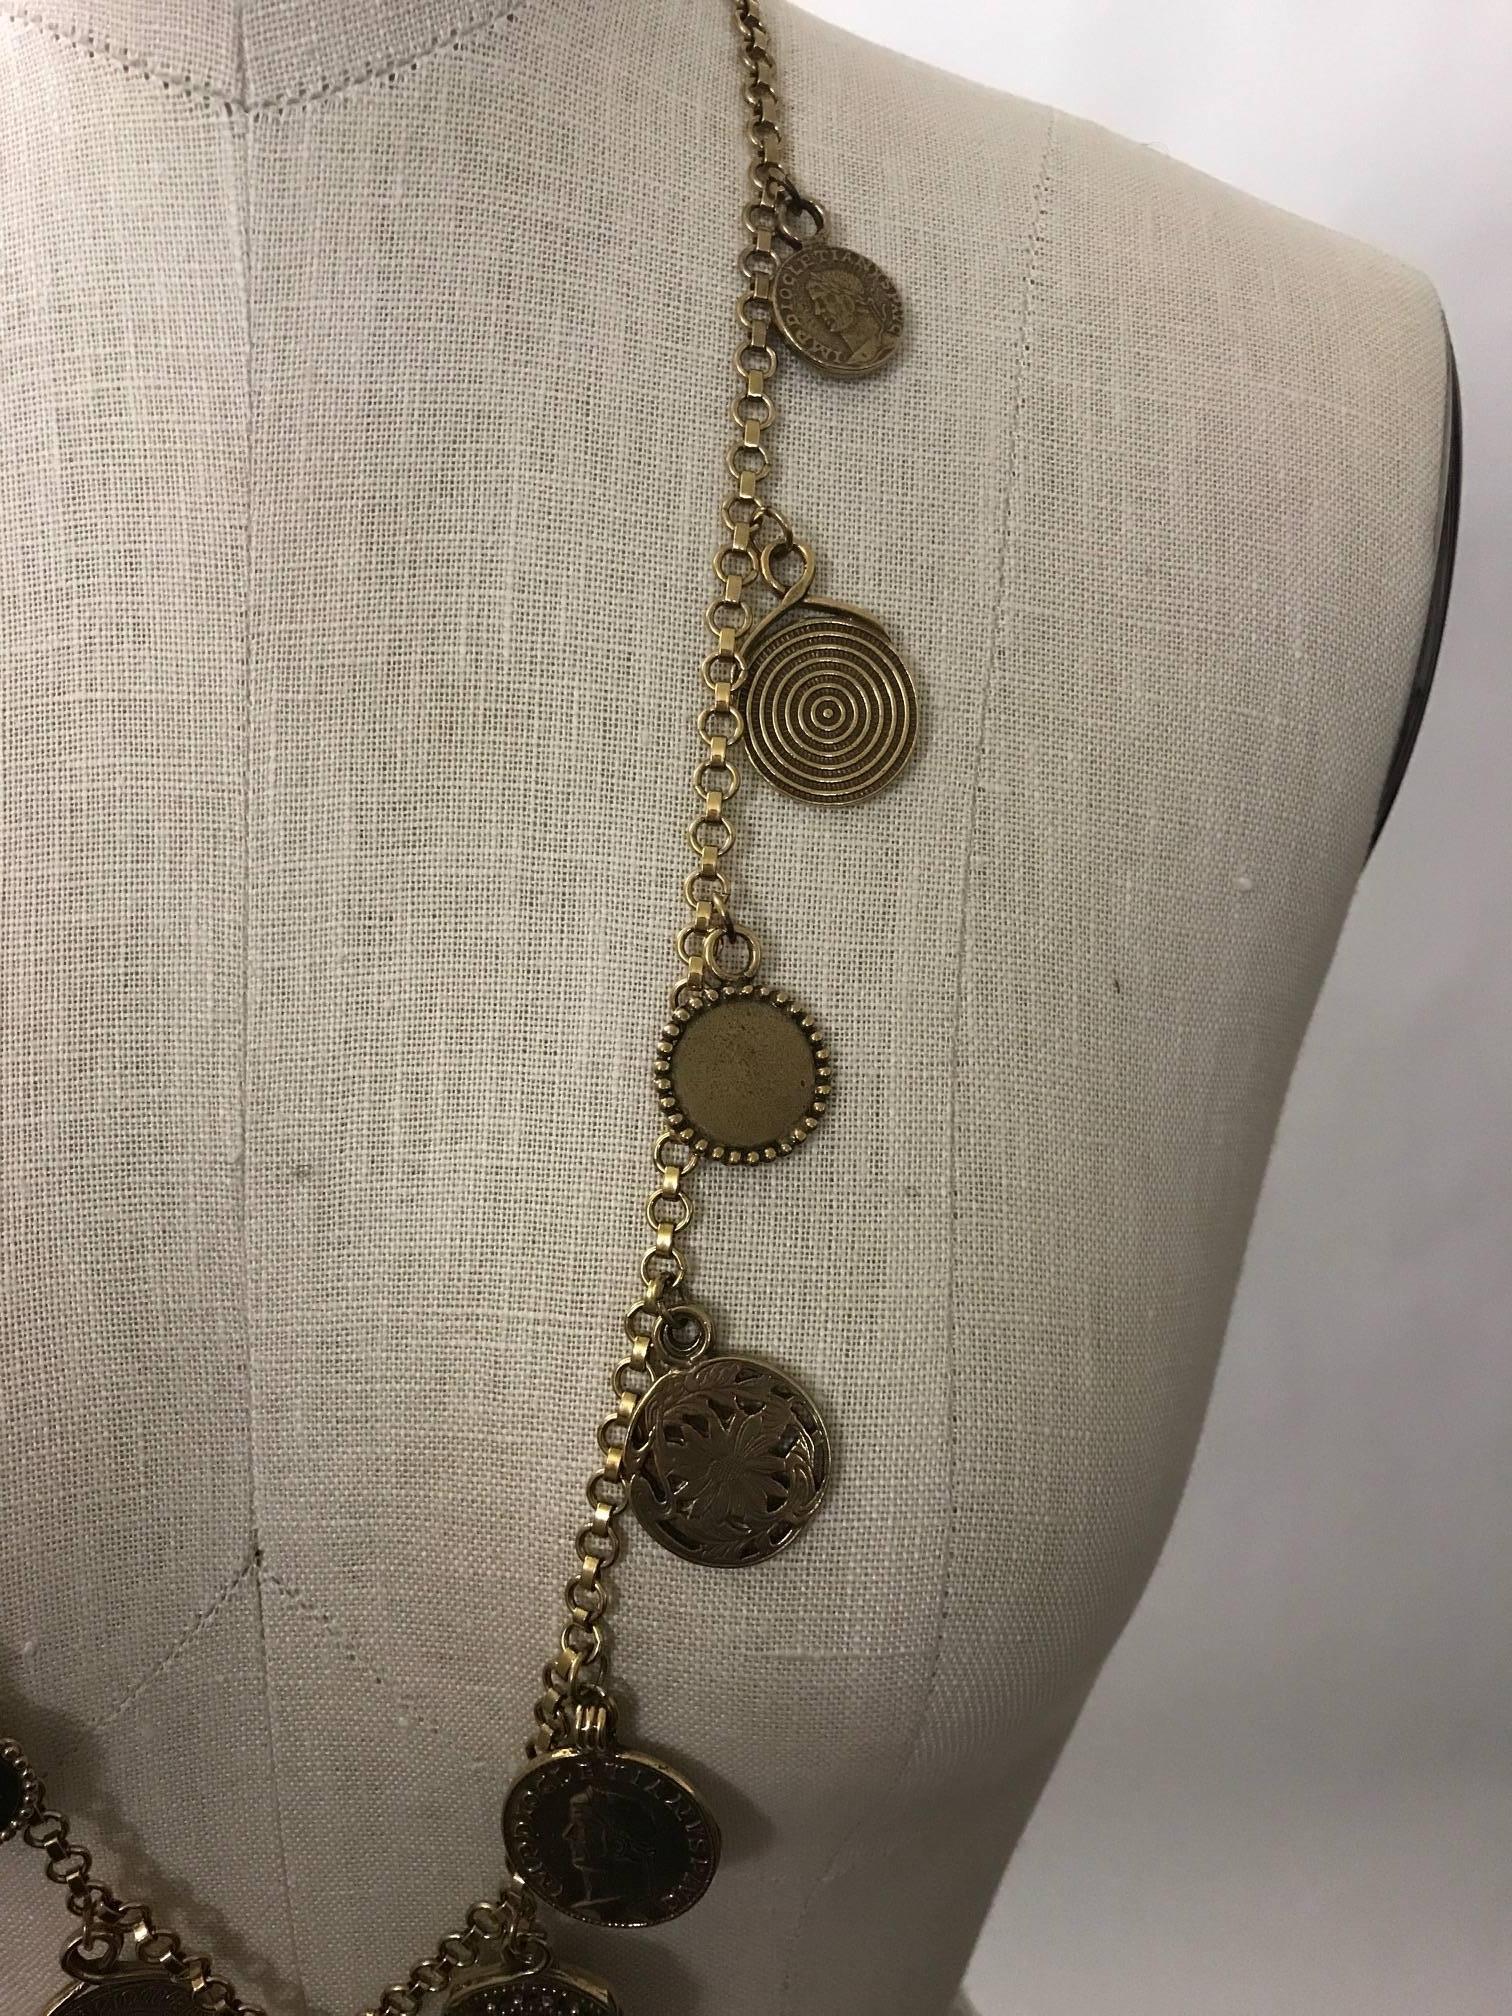 Yves Saint Laurent 1977 Gypsy Coin Medallian Gold Tone Necklace Single Strand 1